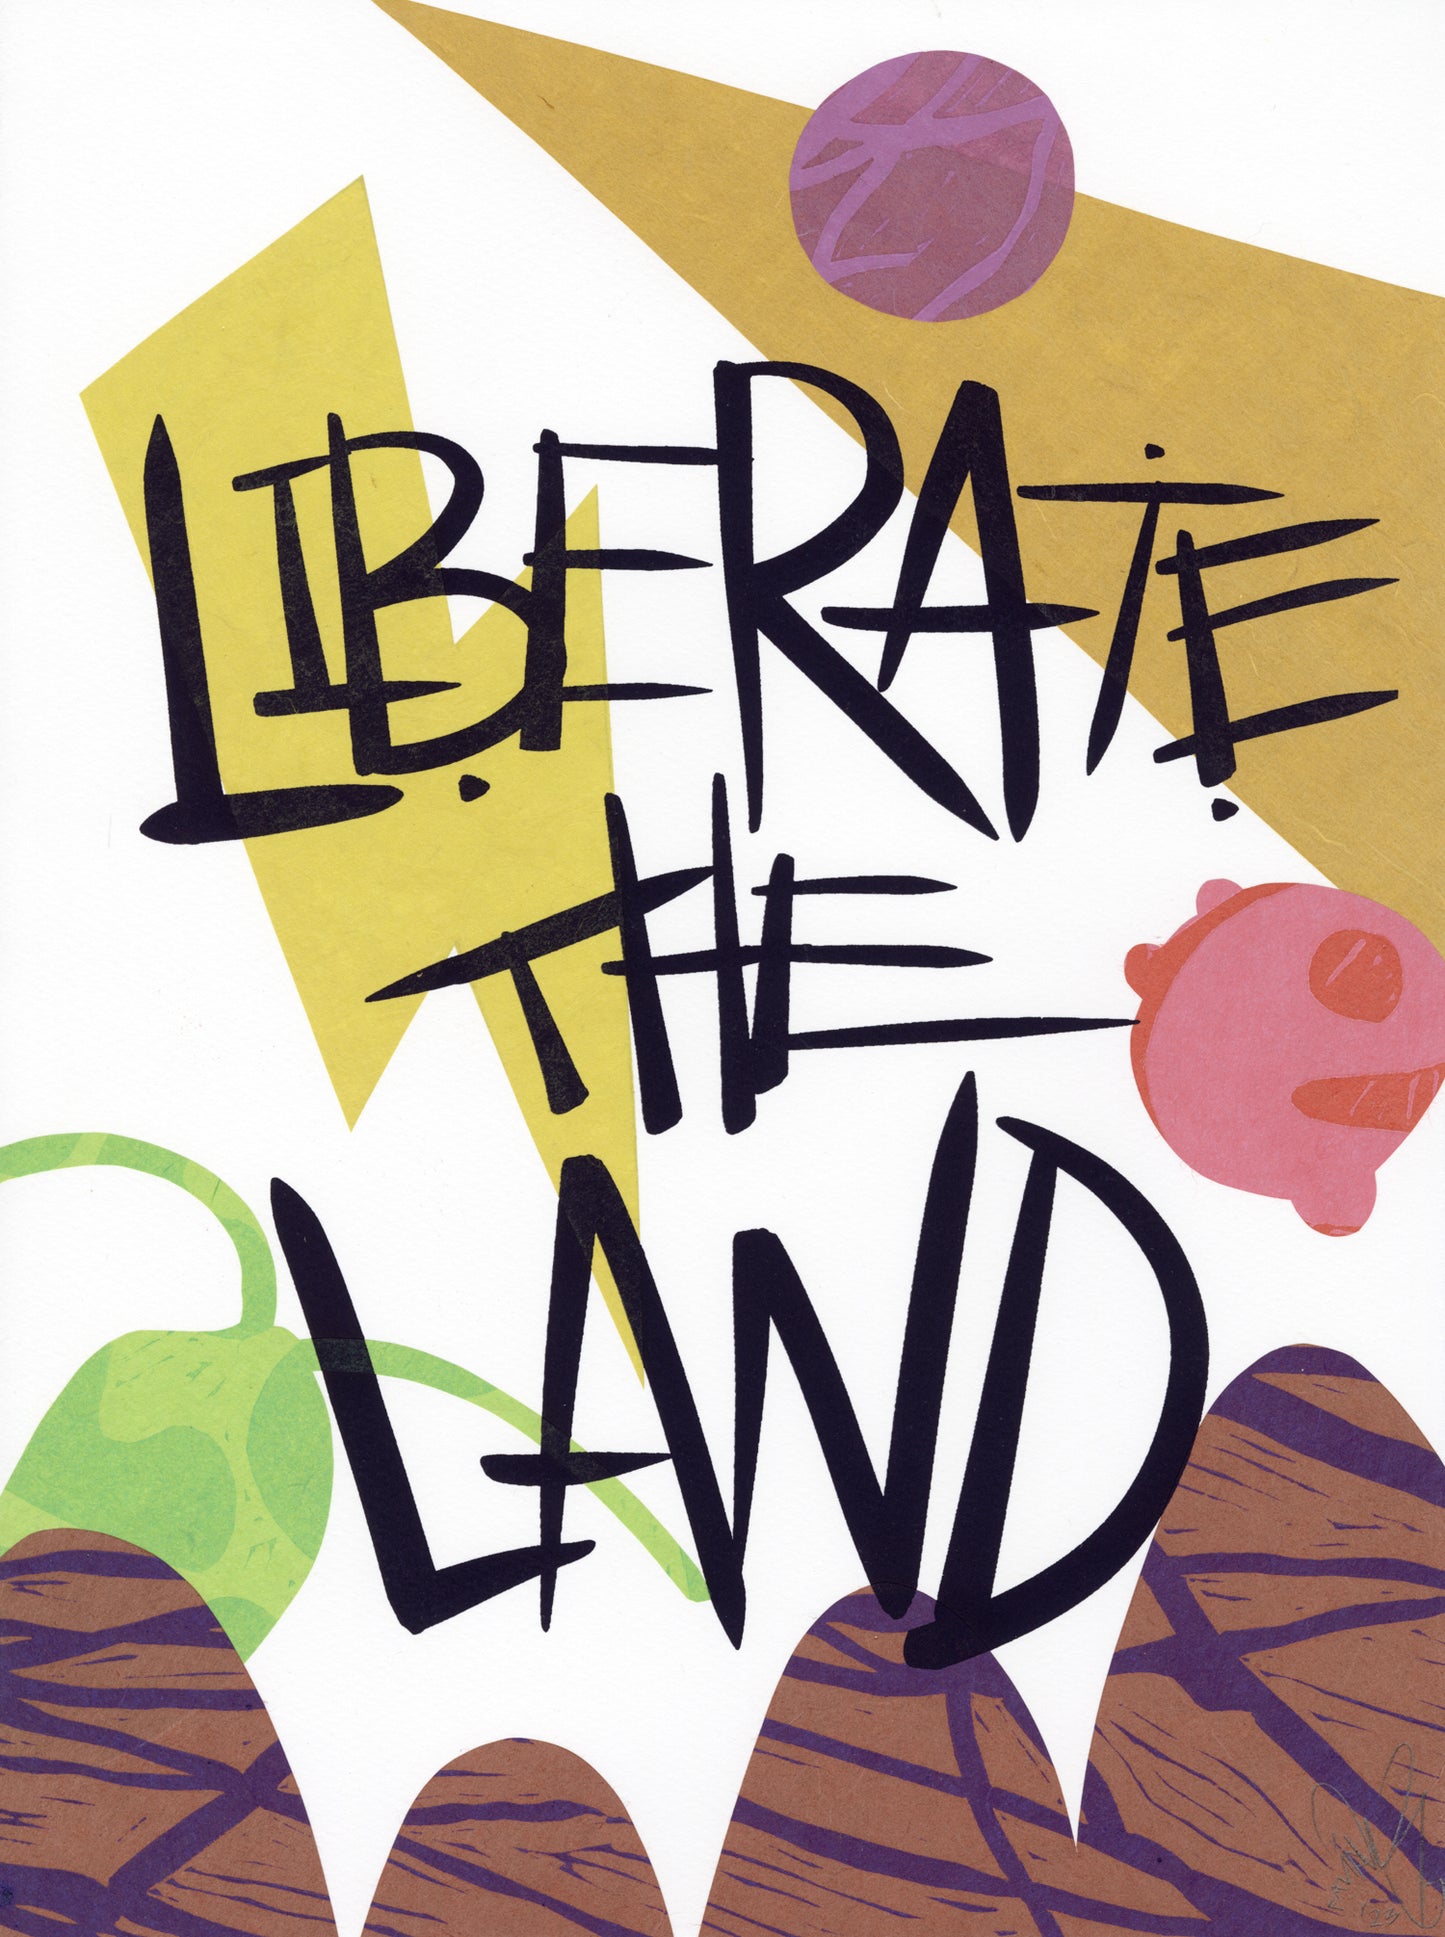 Liberate The Land 16